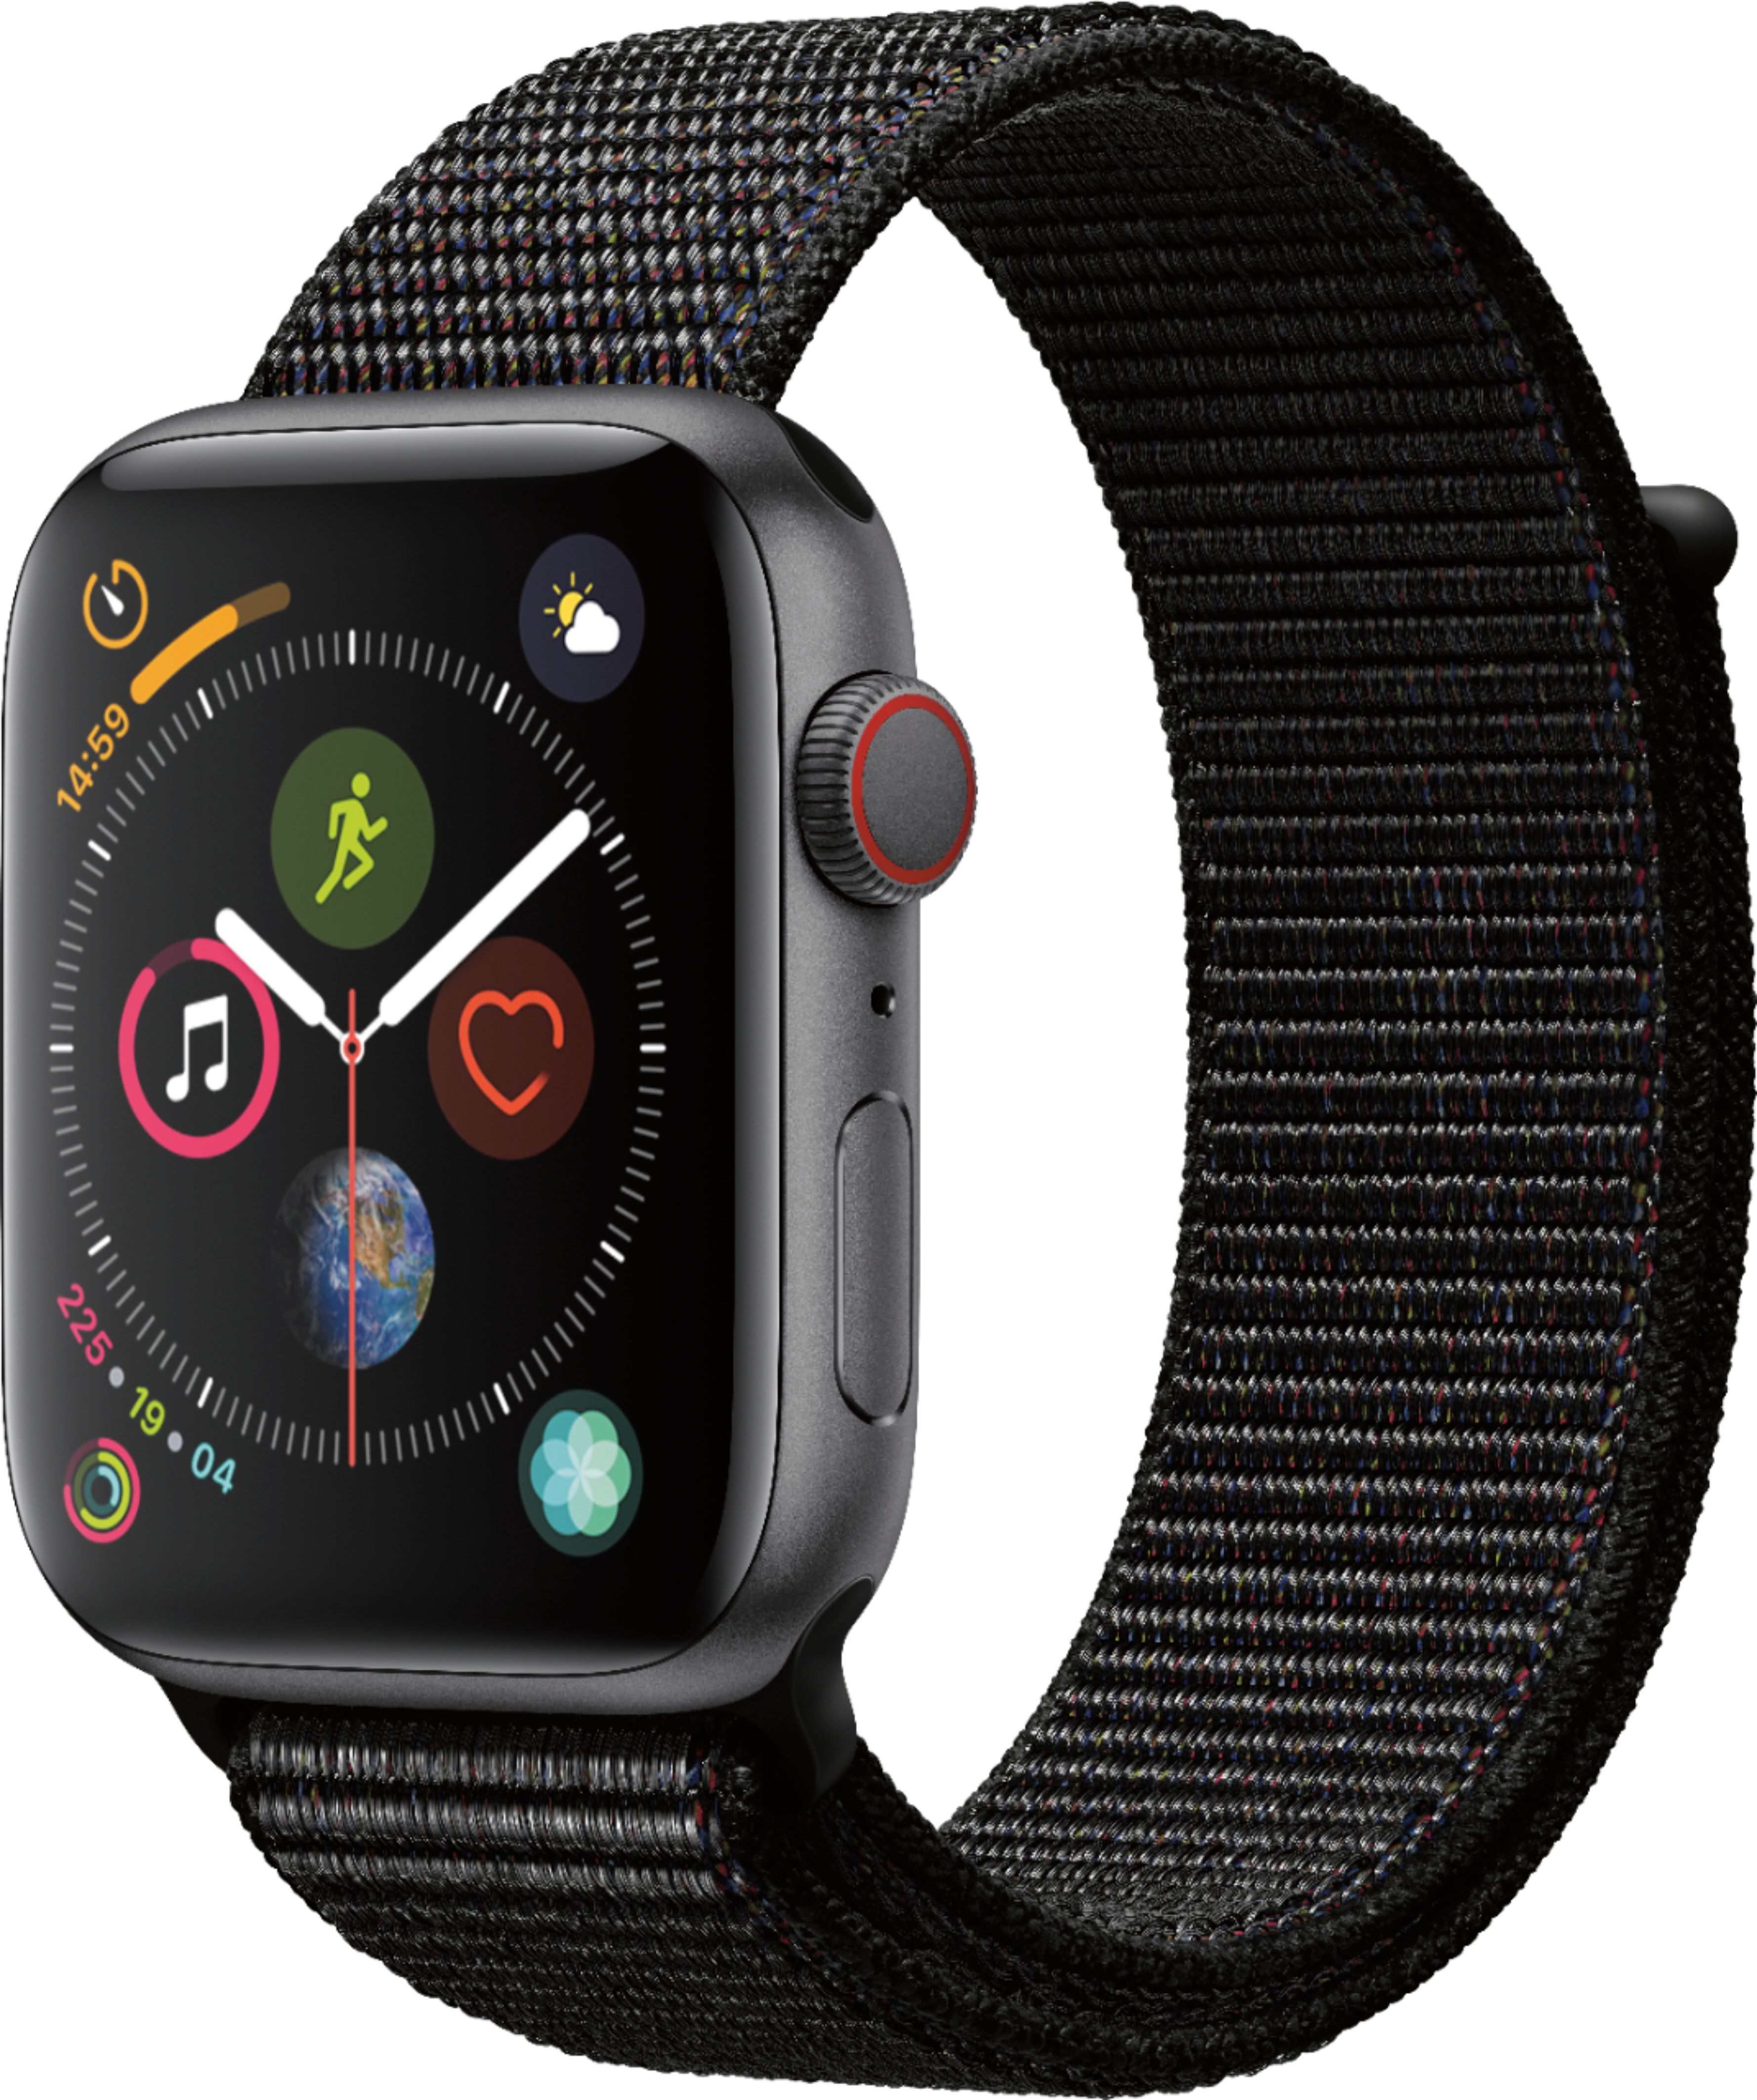 Apple Watch Series 4 (GPS + Cellular) 44mm Space Gray Aluminum Case with  Black Sport Loop (Verizon) MTUX2LL/A - Best Buy